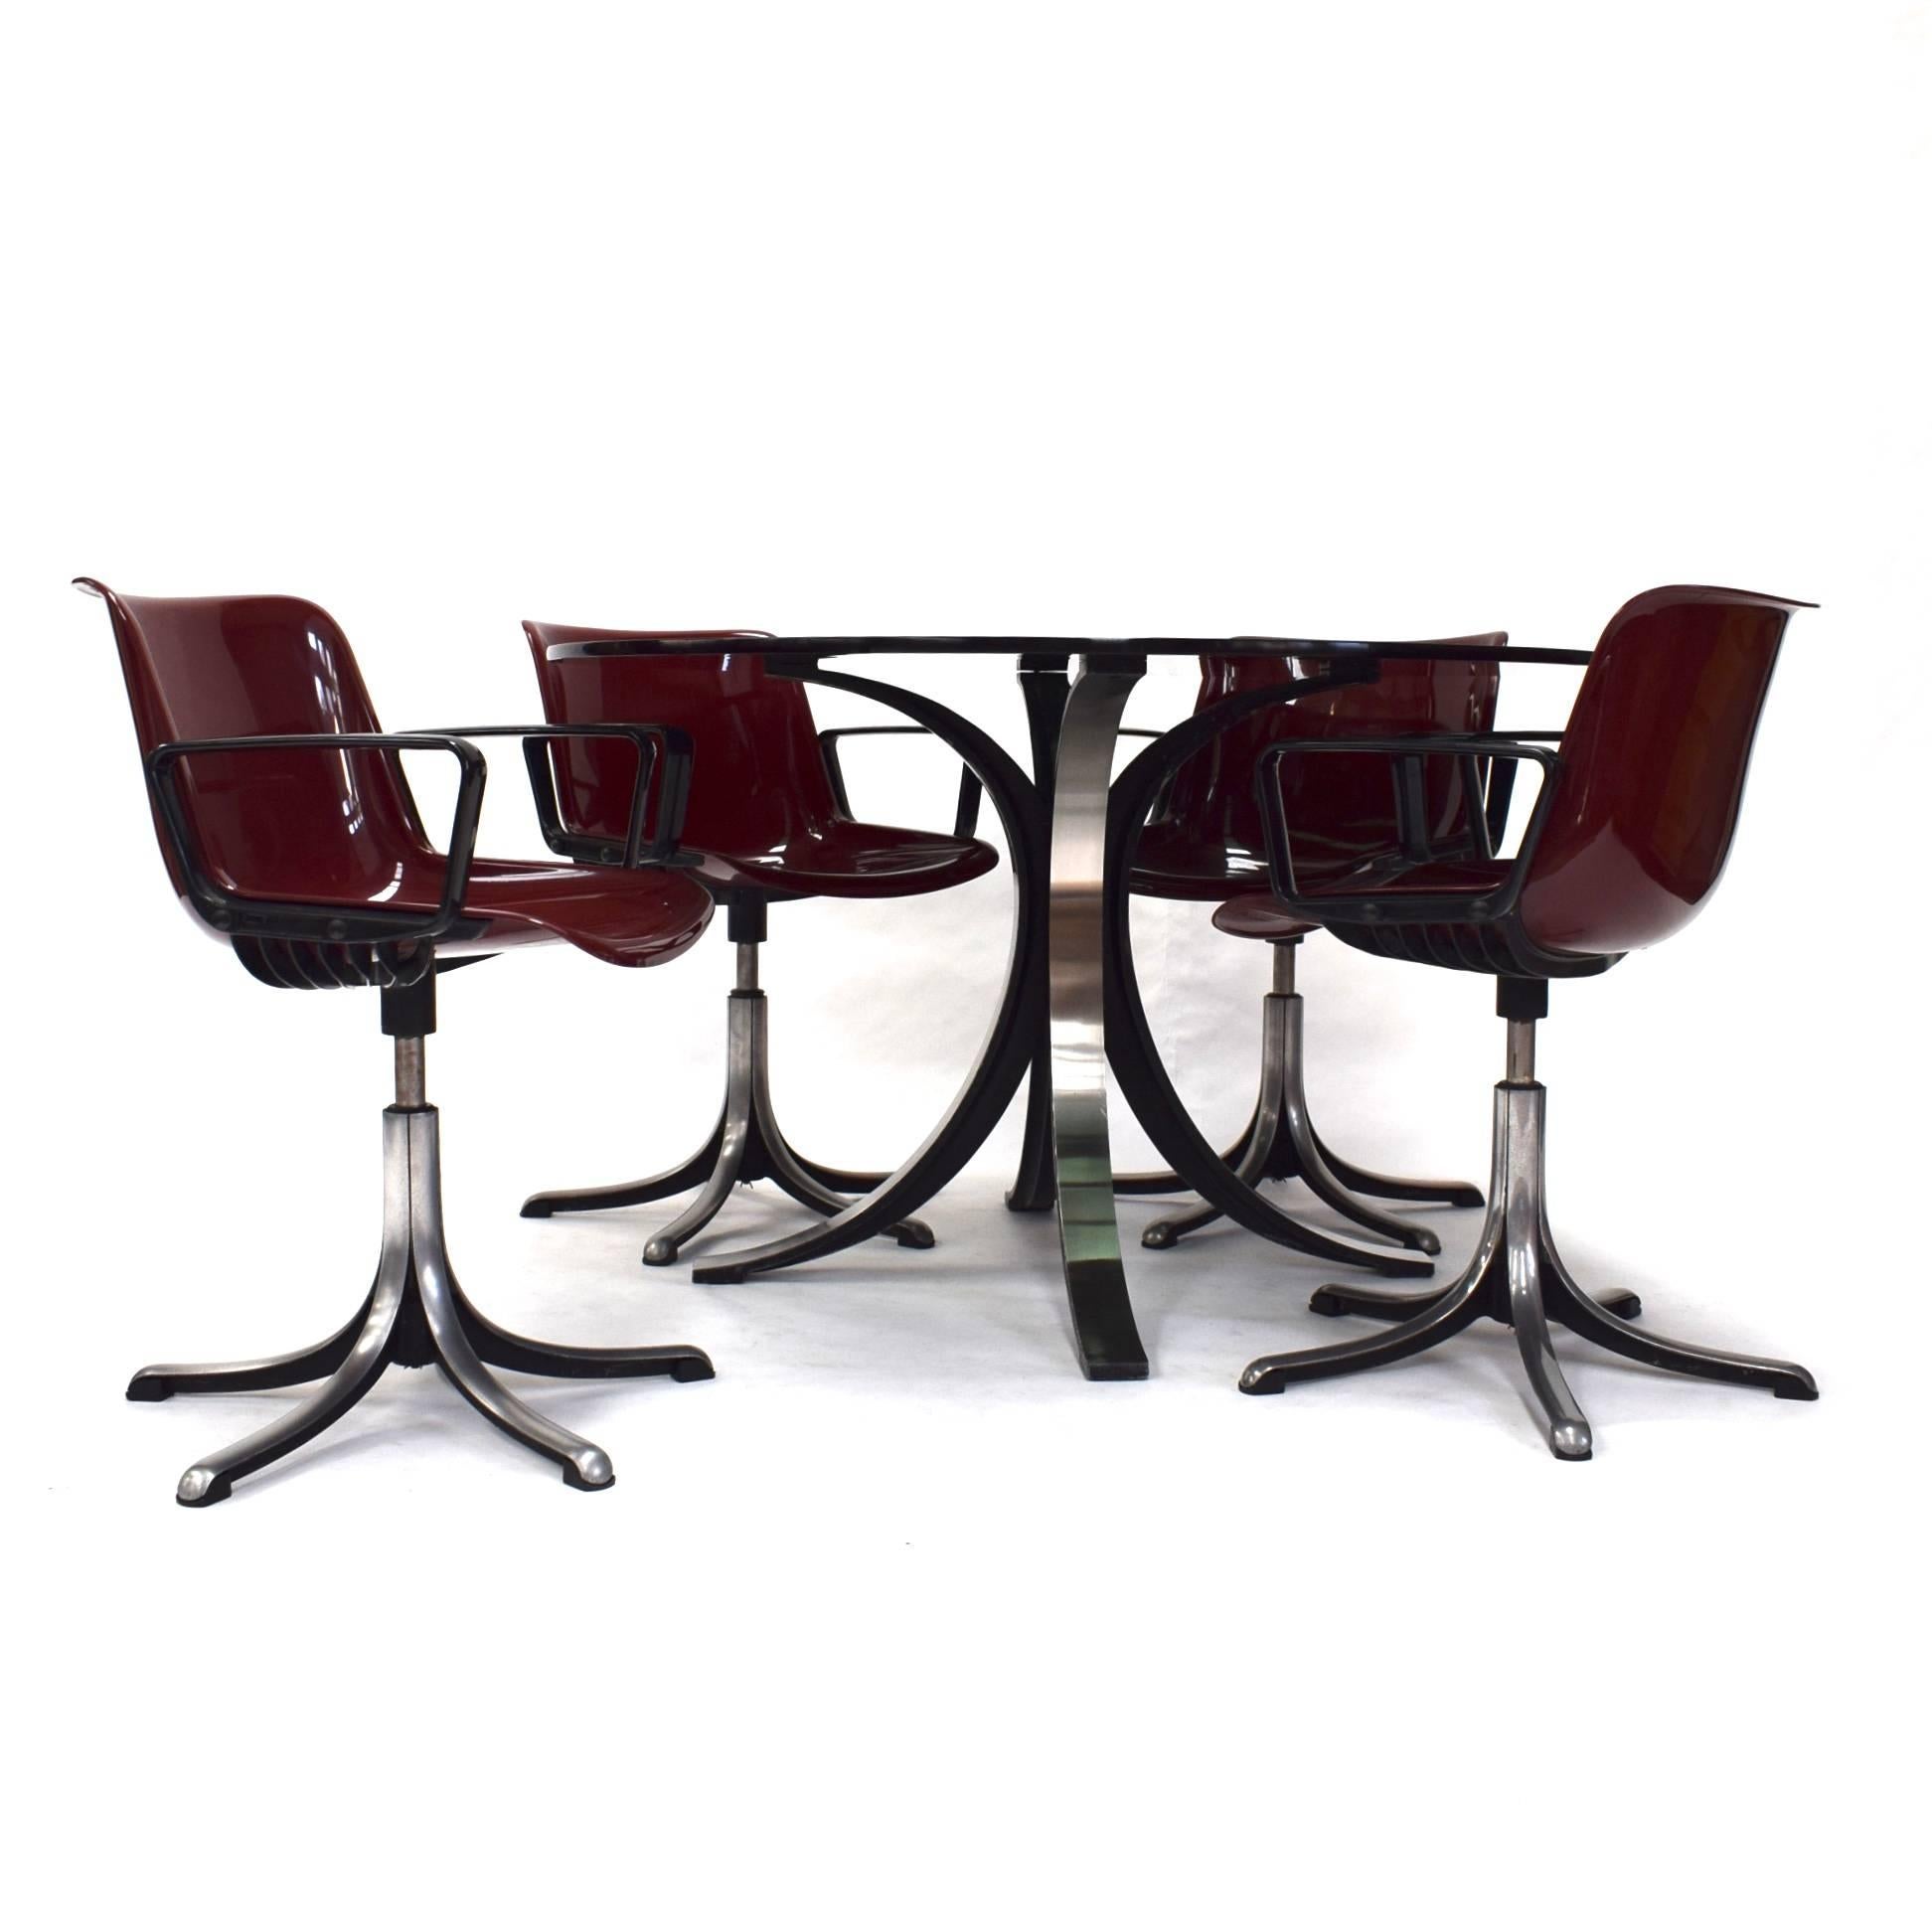 T69 dining set by Osvaldo Borsani for TECNO. The table and chairs are made of brushed aluminium. The chairs (swivel) have five aluminum feet, plastic seat shells in a Bordeaux red colour and black plastic armrests. The glass table is made of thick